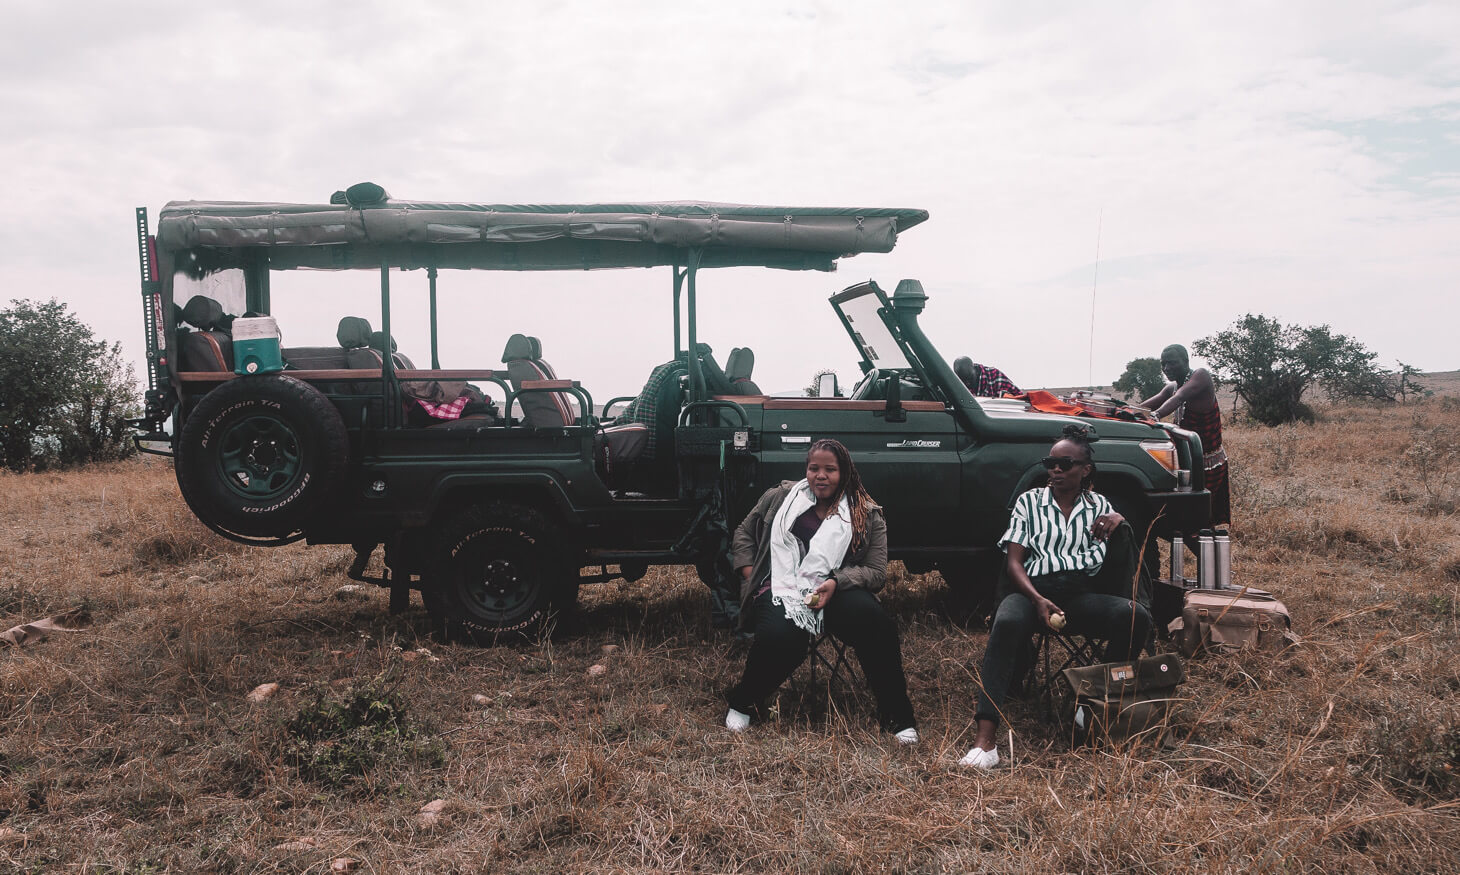 People sitted beside a land cruiser in the safari